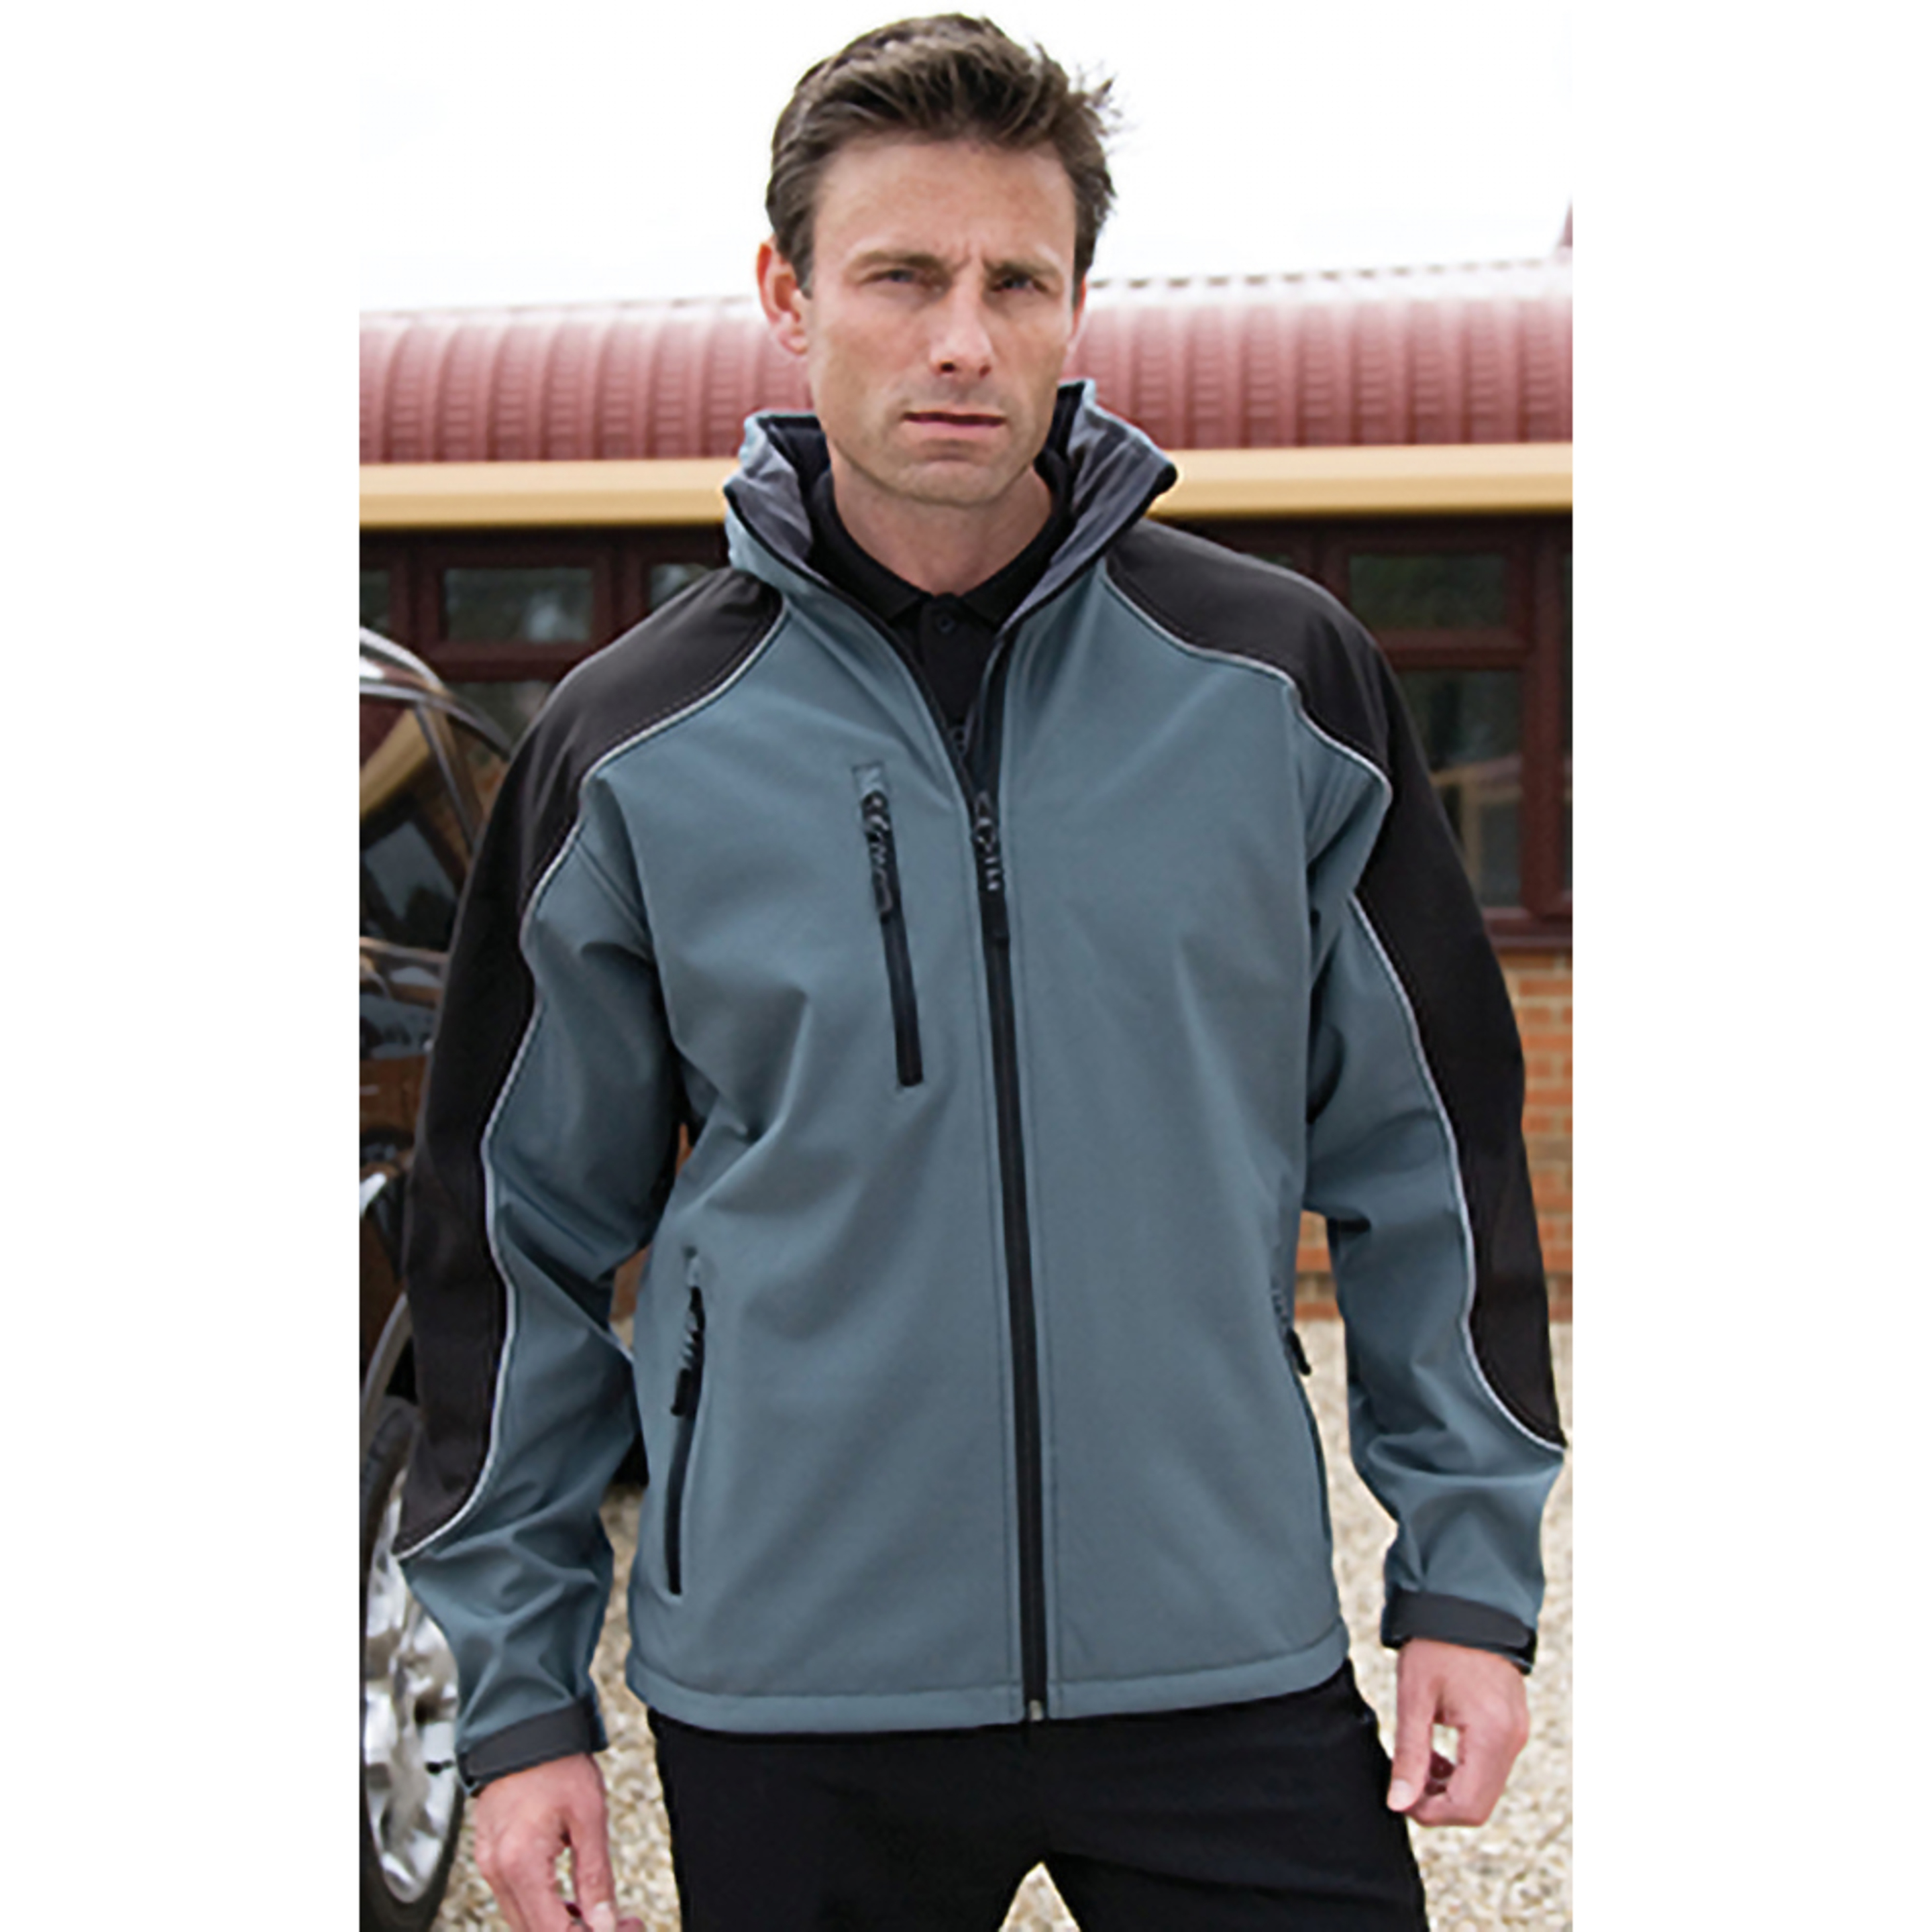 Chaqueta Softshell Con Capucha Transpirable E Impermeable Modelo Ice Fell Result - Gris  MKP